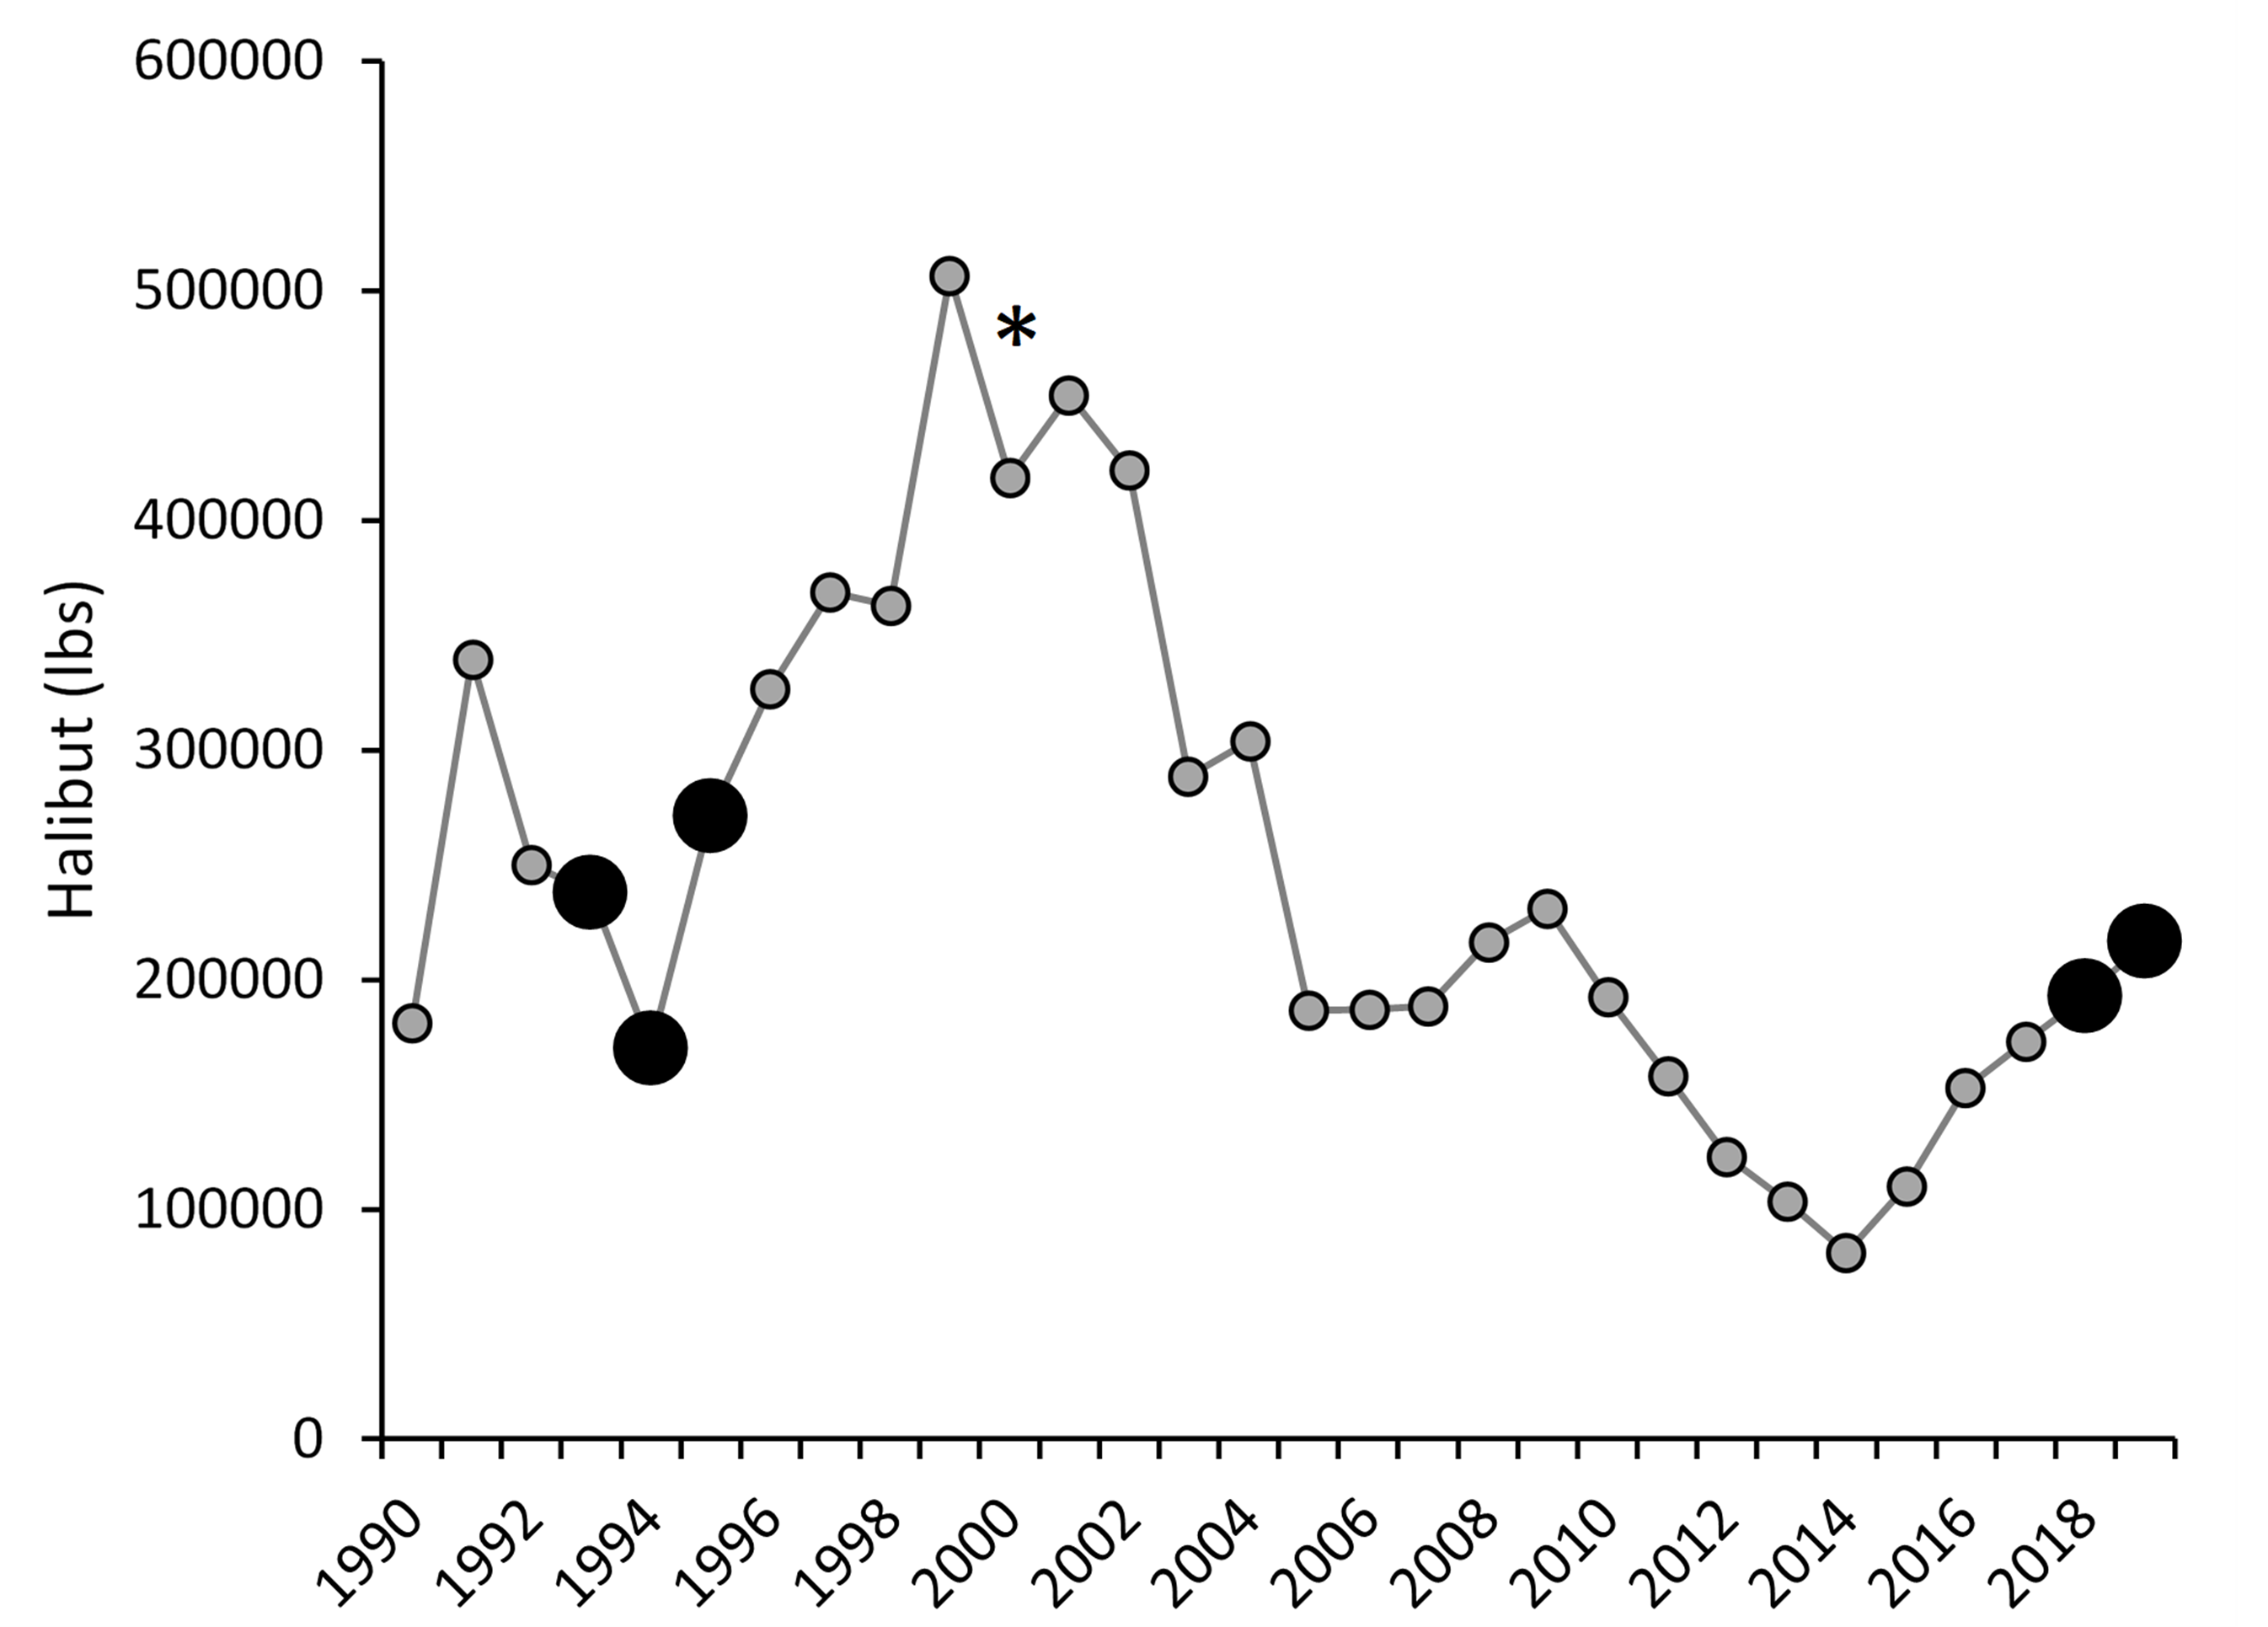 A chart showing commercial landings in pounds of California halibut in Southern California from 1990 to 2019